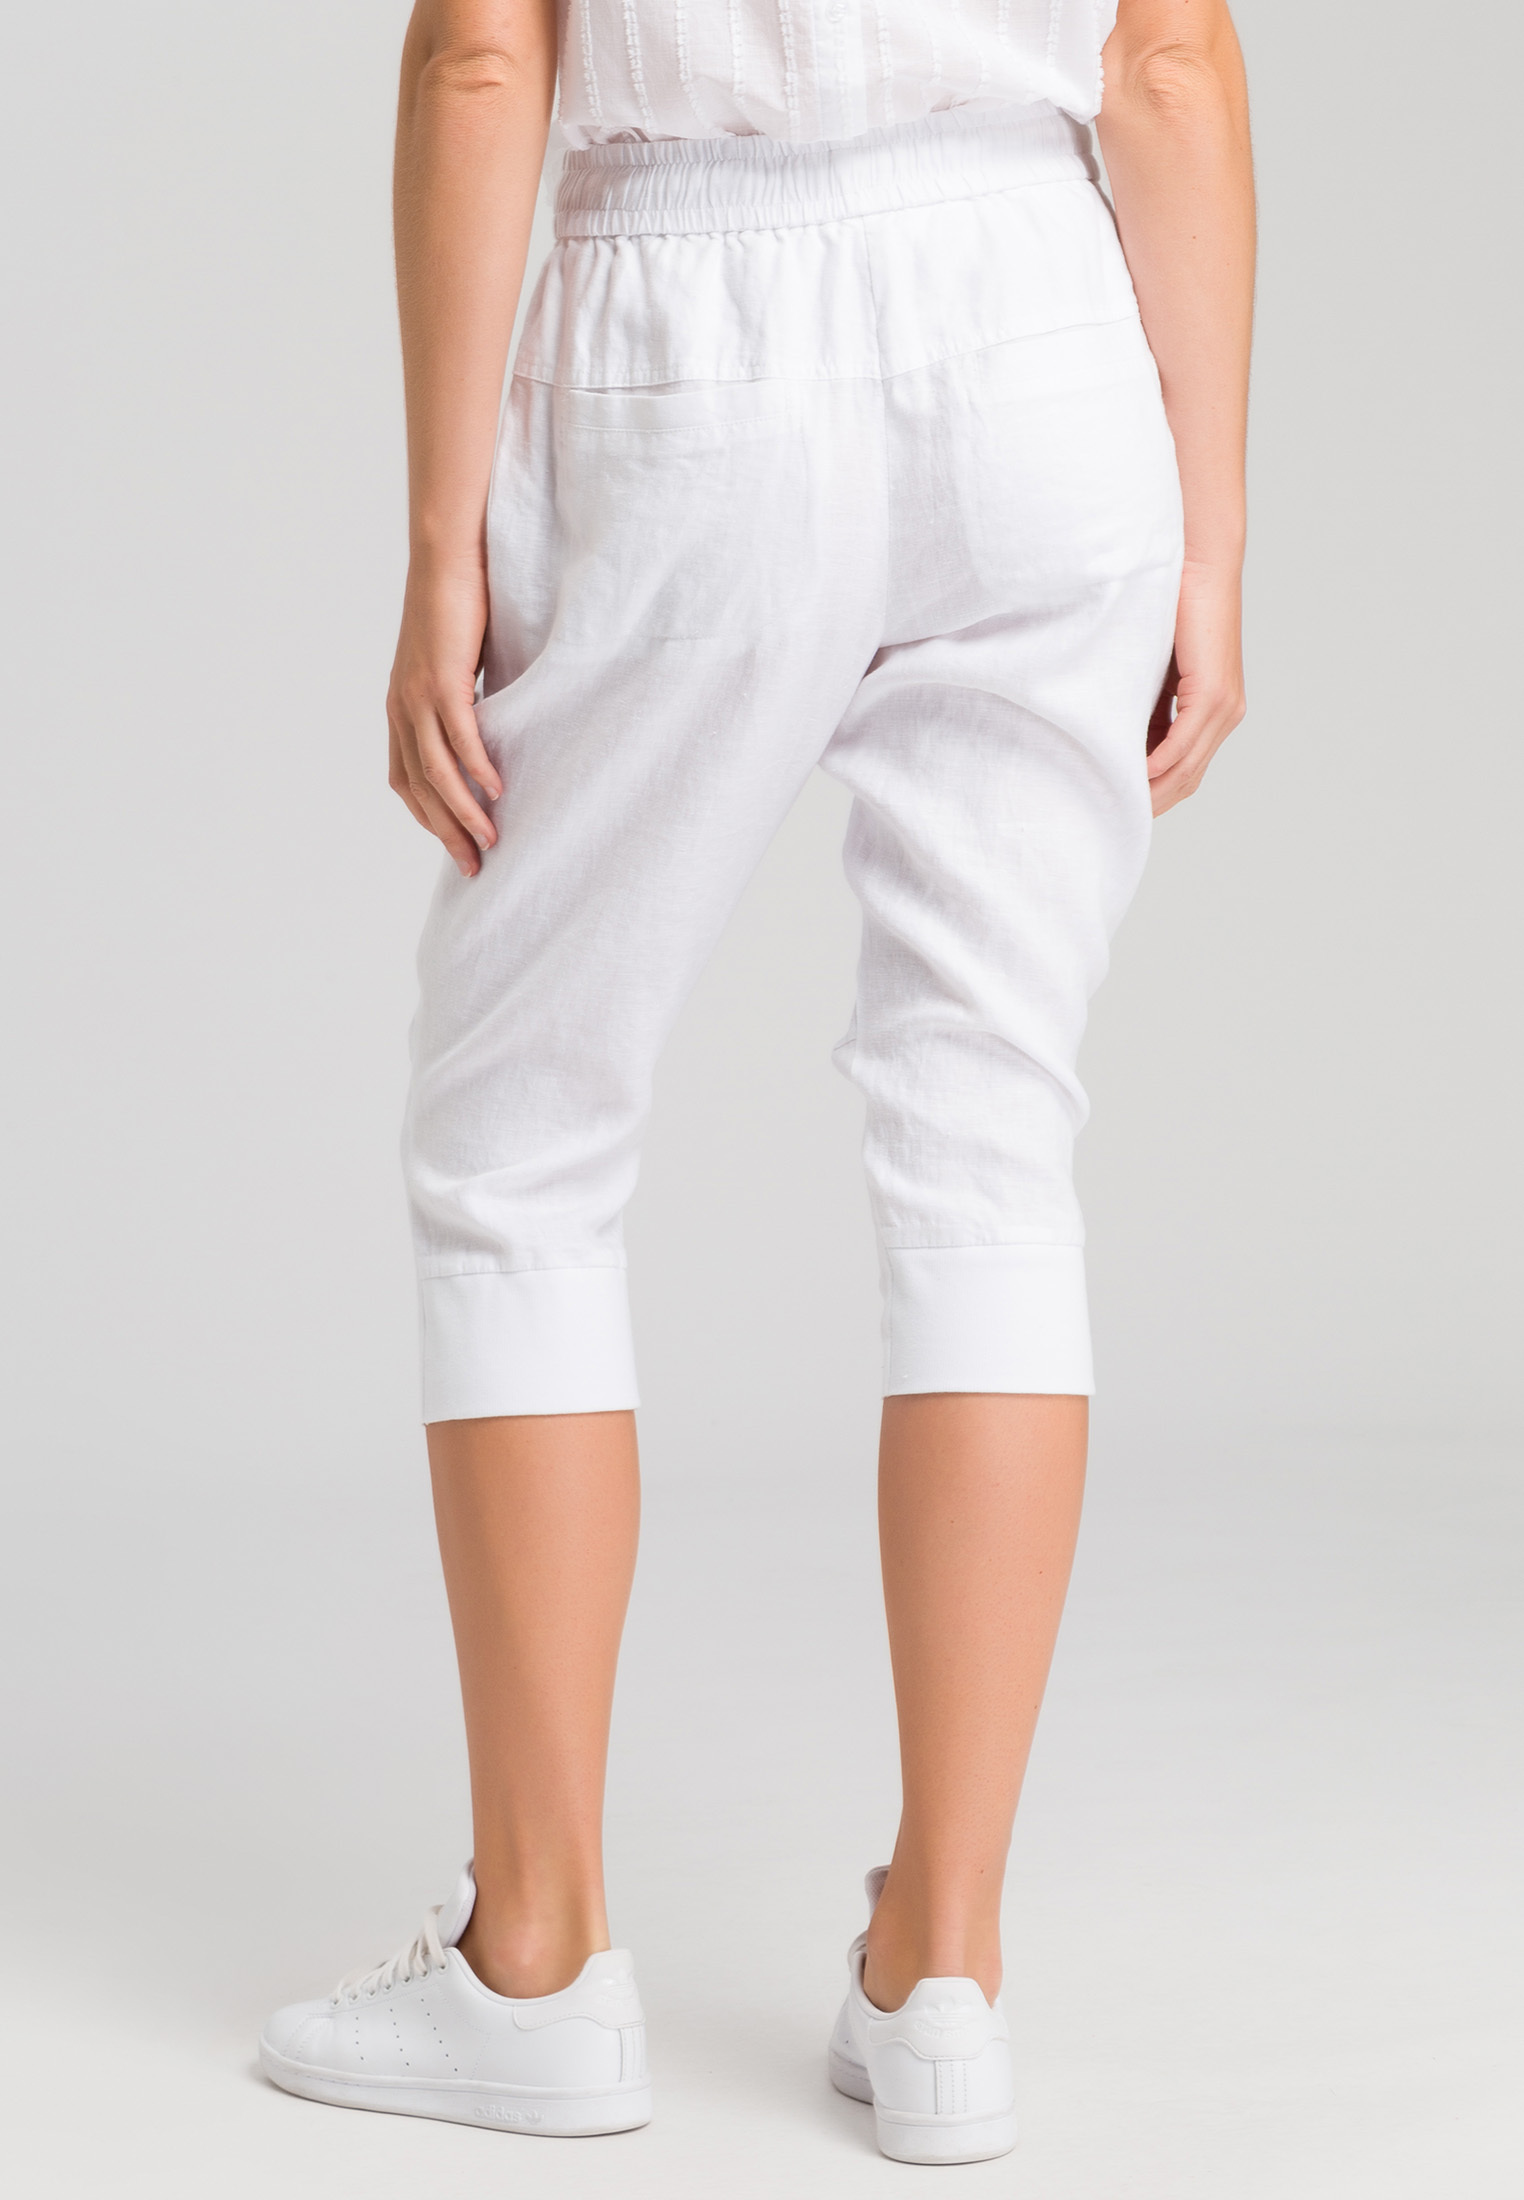 Capri pants made of casual linen | Trousers & Jeans | Fashion